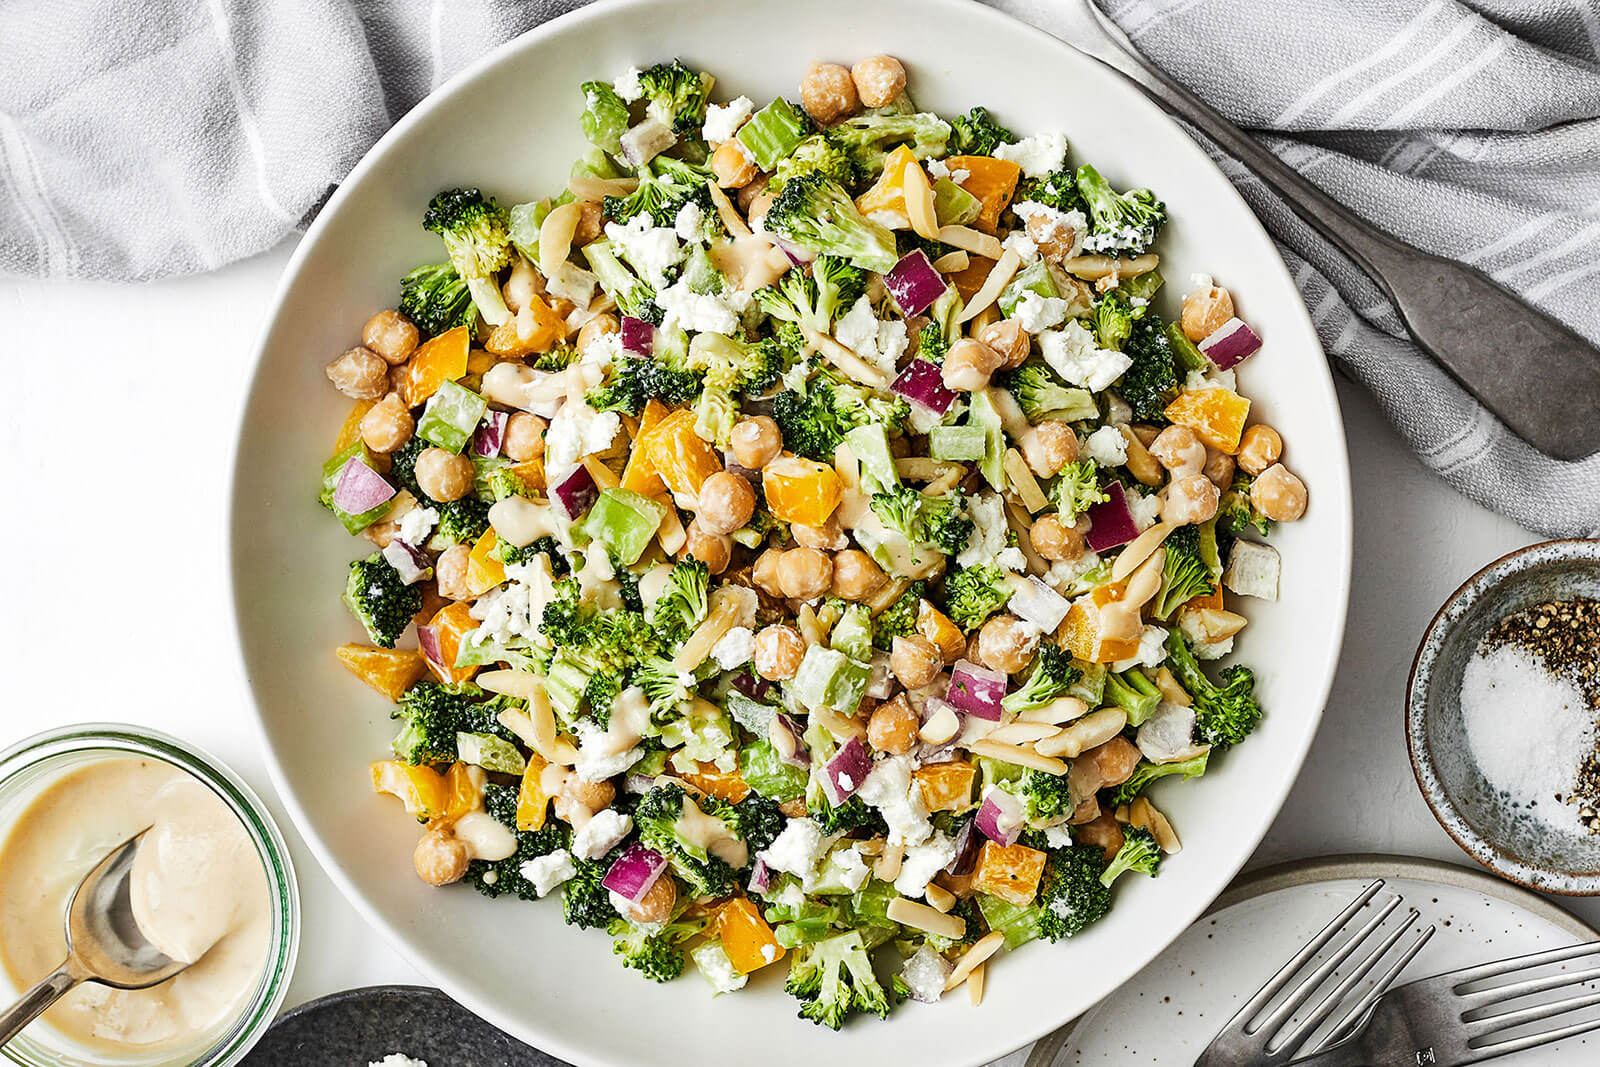 A bowl of broccoli and chickpea salad